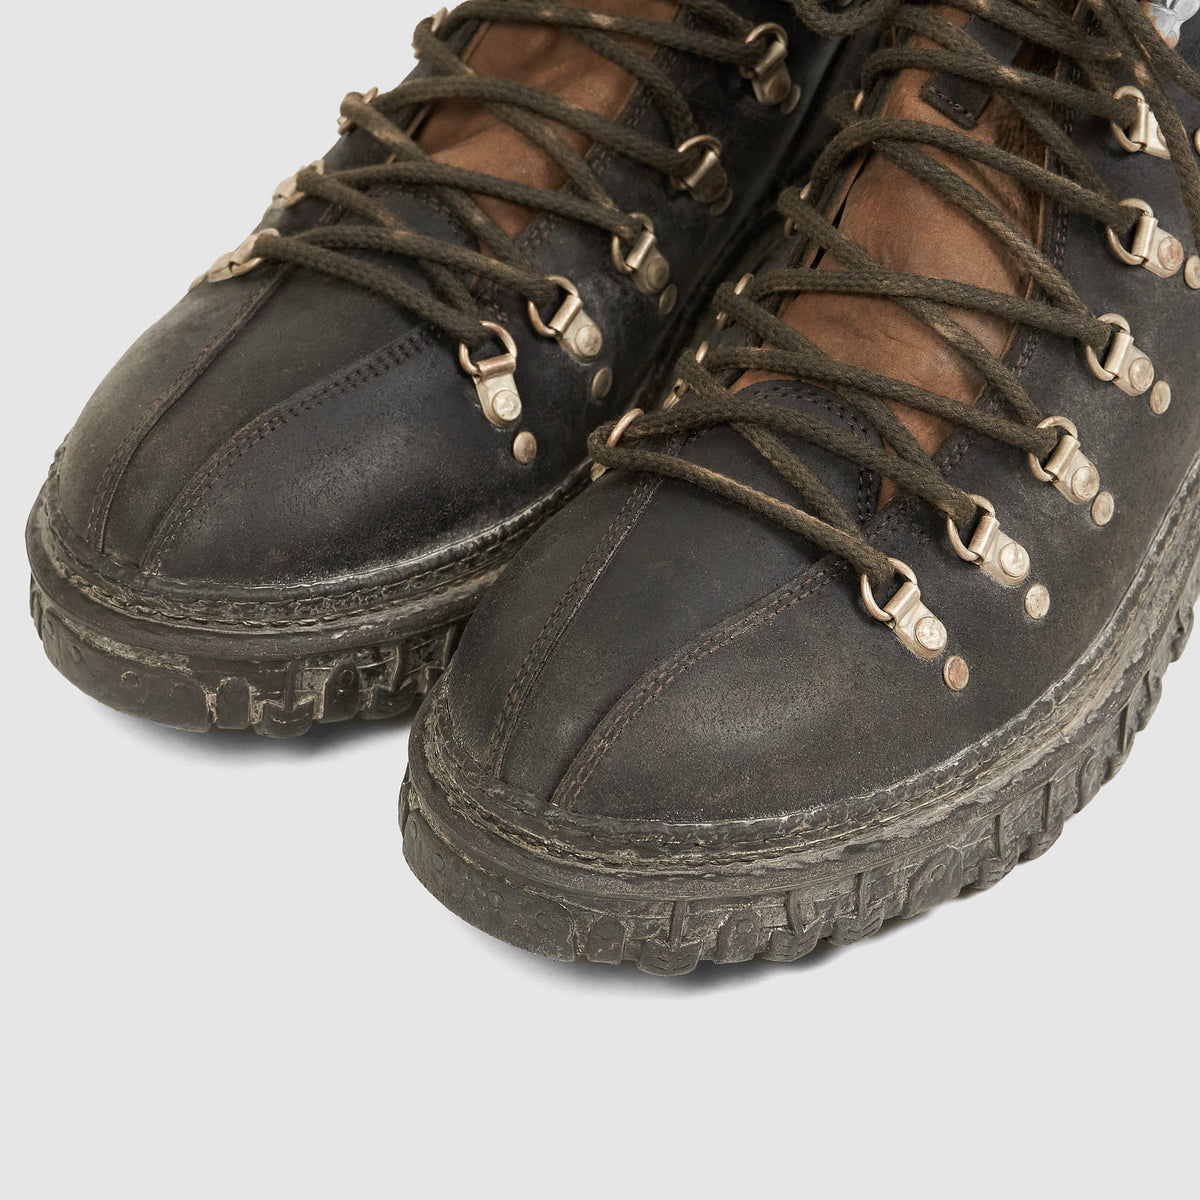 Moma Uomo Vintage Made City  &quot;Hiking&quot; Boot